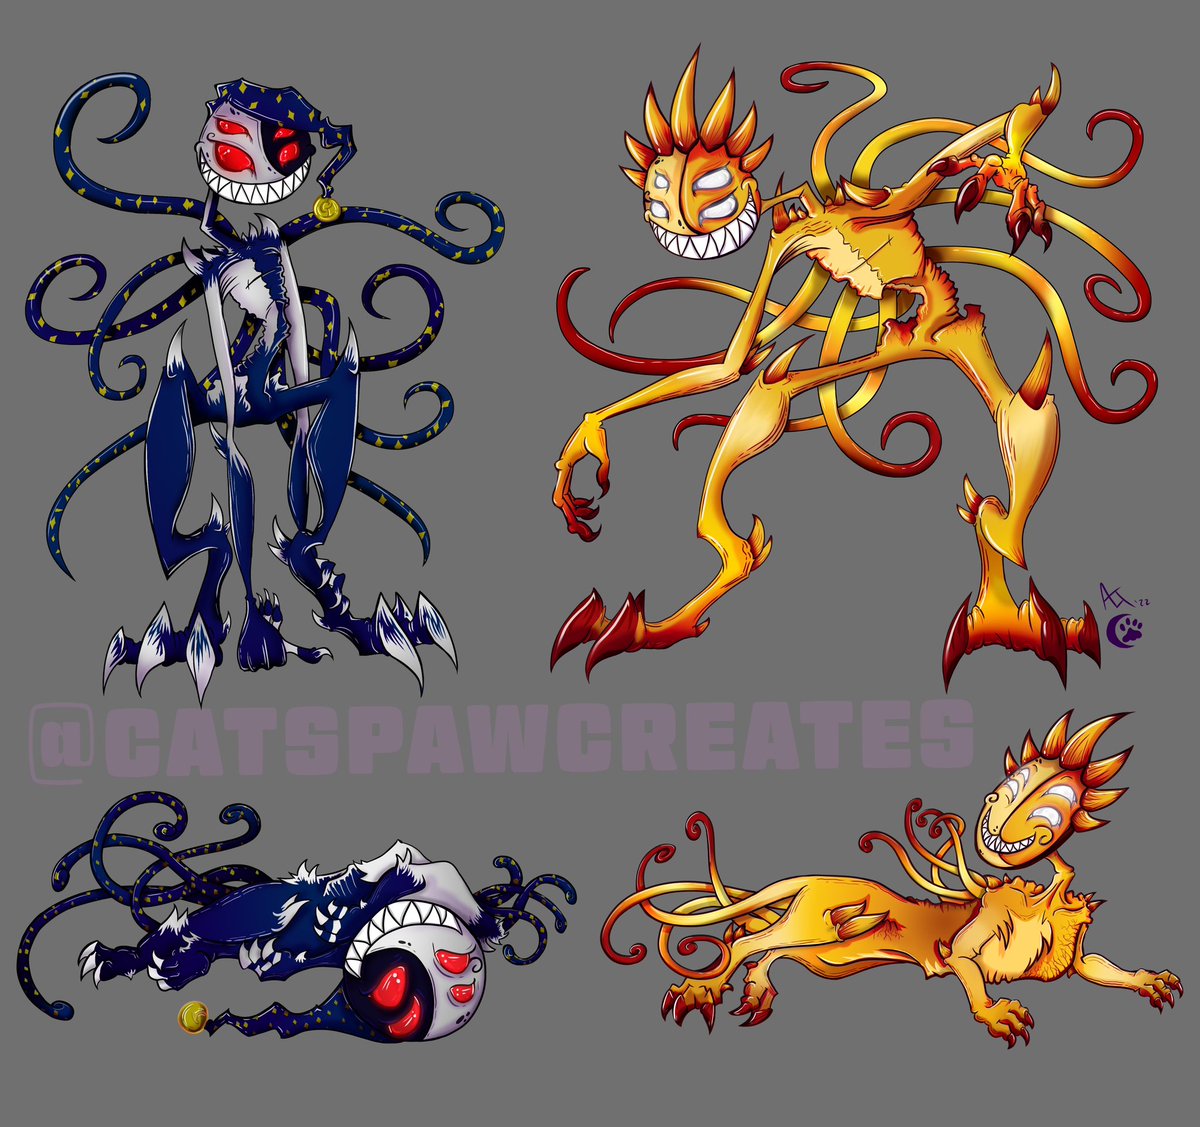 I’ve been working on stuff I can’t share, so have a repost of Cryptid designs and their smaller cat-sized forms from last year. 
#catspawart #sundrop #moondrop #cryptid